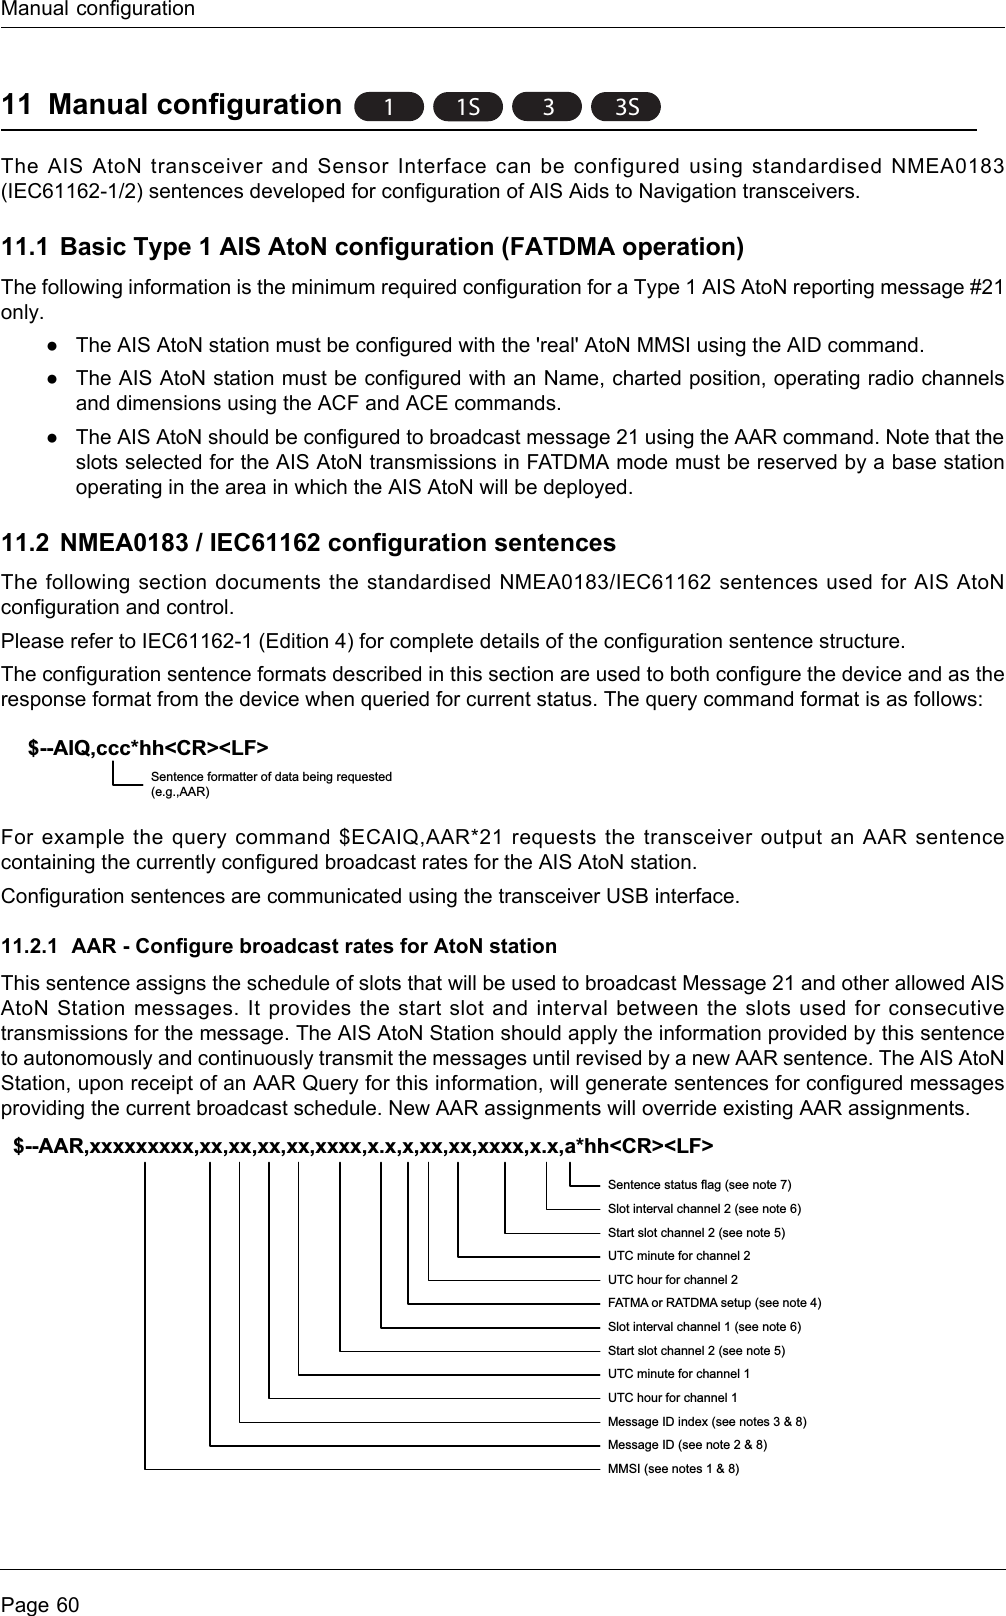 Manual configurationPage 6011 Manual configurationThe AIS AtoN transceiver and Sensor Interface can be configured using standardised NMEA0183 (IEC61162-1/2) sentences developed for configuration of AIS Aids to Navigation transceivers. 11.1 Basic Type 1 AIS AtoN configuration (FATDMA operation) The following information is the minimum required configuration for a Type 1 AIS AtoN reporting message #21 only.●The AIS AtoN station must be configured with the &apos;real&apos; AtoN MMSI using the AID command.●The AIS AtoN station must be configured with an Name, charted position, operating radio channels and dimensions using the ACF and ACE commands.●The AIS AtoN should be configured to broadcast message 21 using the AAR command. Note that the slots selected for the AIS AtoN transmissions in FATDMA mode must be reserved by a base station operating in the area in which the AIS AtoN will be deployed.11.2 NMEA0183 / IEC61162 configuration sentencesThe following section documents the standardised NMEA0183/IEC61162 sentences used for AIS AtoN configuration and control. Please refer to IEC61162-1 (Edition 4) for complete details of the configuration sentence structure.The configuration sentence formats described in this section are used to both configure the device and as the response format from the device when queried for current status. The query command format is as follows:For example the query command $ECAIQ,AAR*21 requests the transceiver output an AAR sentence containing the currently configured broadcast rates for the AIS AtoN station.Configuration sentences are communicated using the transceiver USB interface.11.2.1 AAR - Configure broadcast rates for AtoN stationThis sentence assigns the schedule of slots that will be used to broadcast Message 21 and other allowed AIS AtoN Station messages. It provides the start slot and interval between the slots used for consecutive transmissions for the message. The AIS AtoN Station should apply the information provided by this sentence to autonomously and continuously transmit the messages until revised by a new AAR sentence. The AIS AtoN Station, upon receipt of an AAR Query for this information, will generate sentences for configured messages providing the current broadcast schedule. New AAR assignments will override existing AAR assignments.11S 33S$--AIQ,ccc*hh&lt;CR&gt;&lt;LF&gt;Sentence formatter of data being requested (e.g.,AAR)$--AAR,xxxxxxxxx,xx,xx,xx,xx,xxxx,x.x,x,xx,xx,xxxx,x.x,a*hh&lt;CR&gt;&lt;LF&gt;Sentence status flag (see note 7)Slot interval channel 2 (see note 6)Start slot channel 2 (see note 5)UTC minute for channel 2UTC hour for channel 2FATMA or RATDMA setup (see note 4)Slot interval channel 1 (see note 6)Start slot channel 2 (see note 5)UTC minute for channel 1UTC hour for channel 1Message ID index (see notes 3 &amp; 8)Message ID (see note 2 &amp; 8)MMSI (see notes 1 &amp; 8)